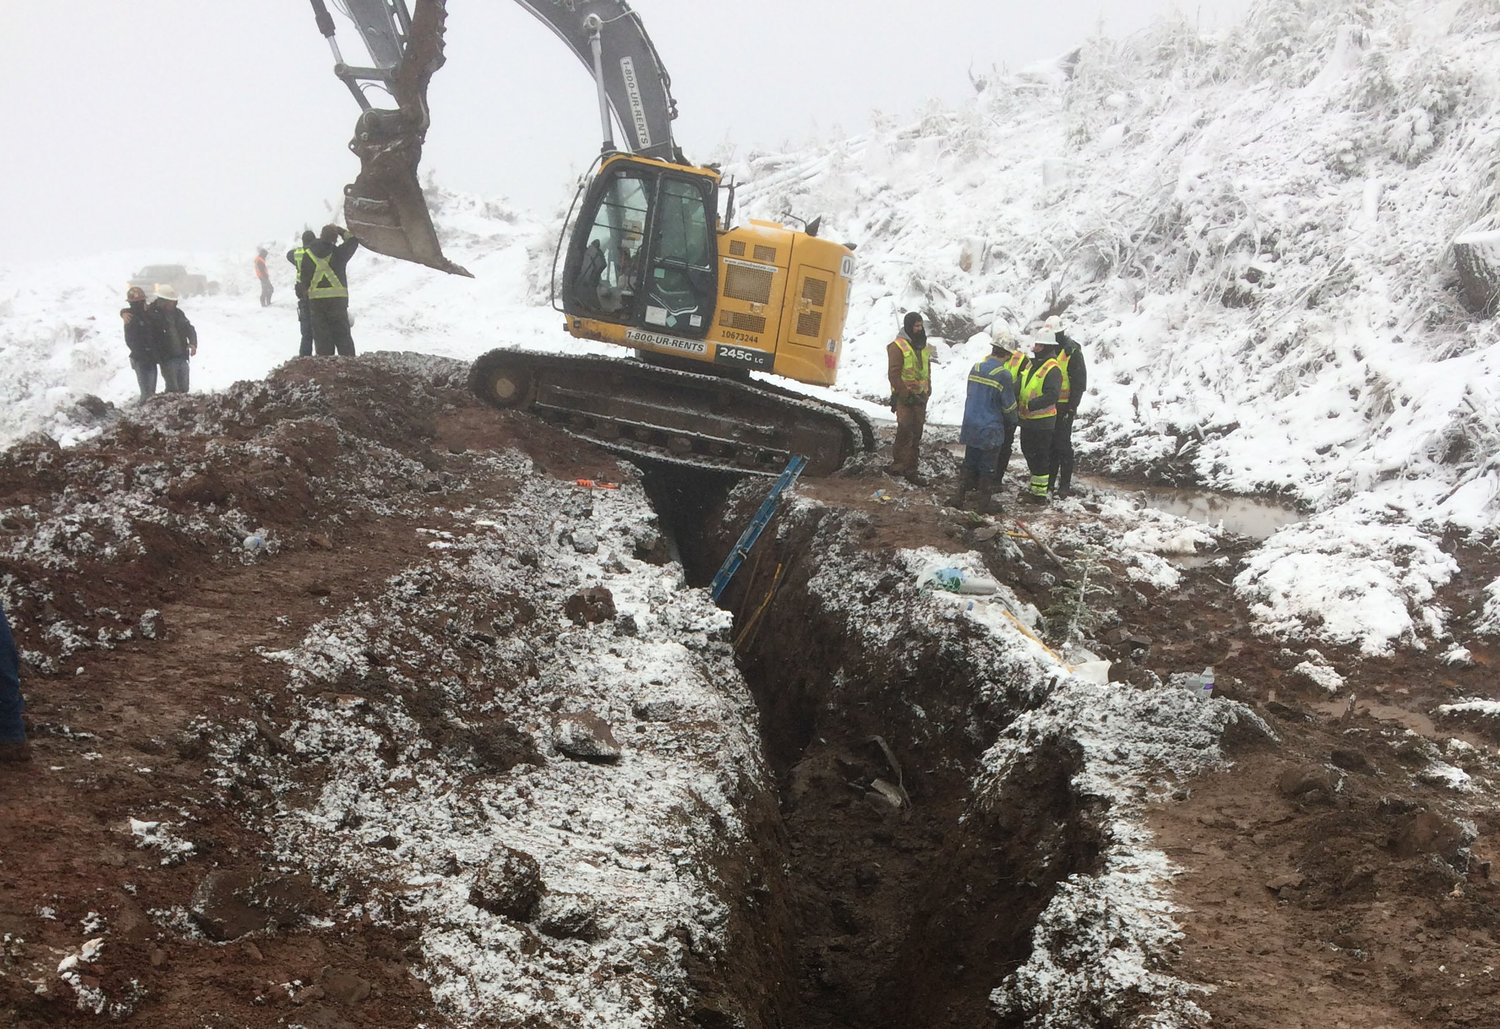 An escavator straddles the trench where two contractors were buried in a trench collapse. Records from the Thurston County Sheriff’s Office estimate the maximum depth of the trench to be around 12 feet deep.